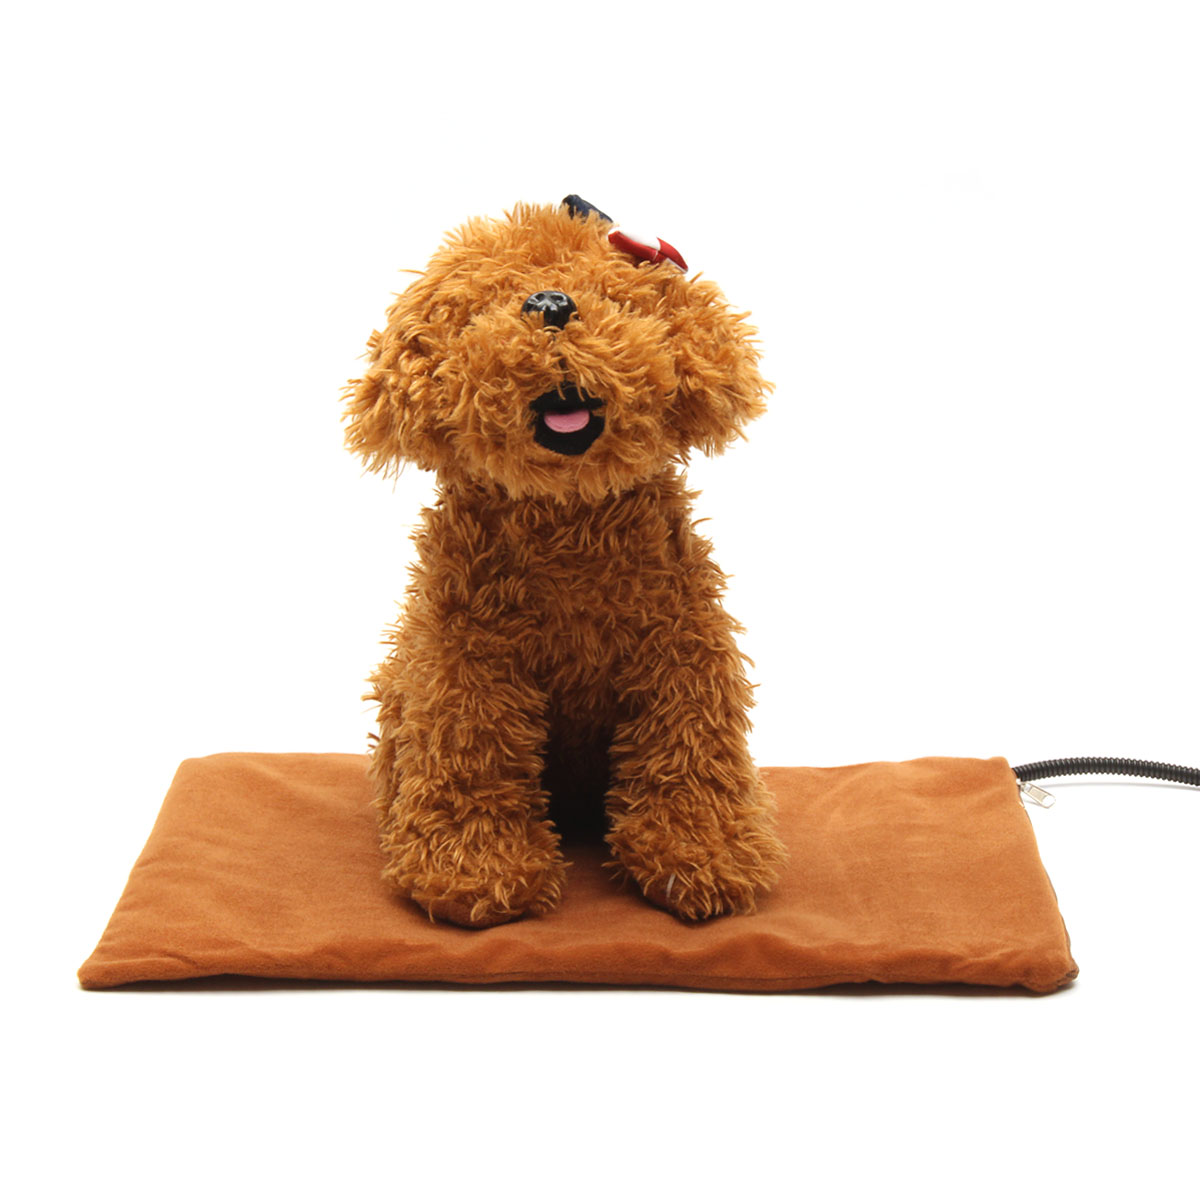 12V-Pet-Heat-Pad-Sotical-Veamor-Electric-Heating-Pad-for-Cats-and-Dogs-Waterproof-Warming-Mat-1239342-3